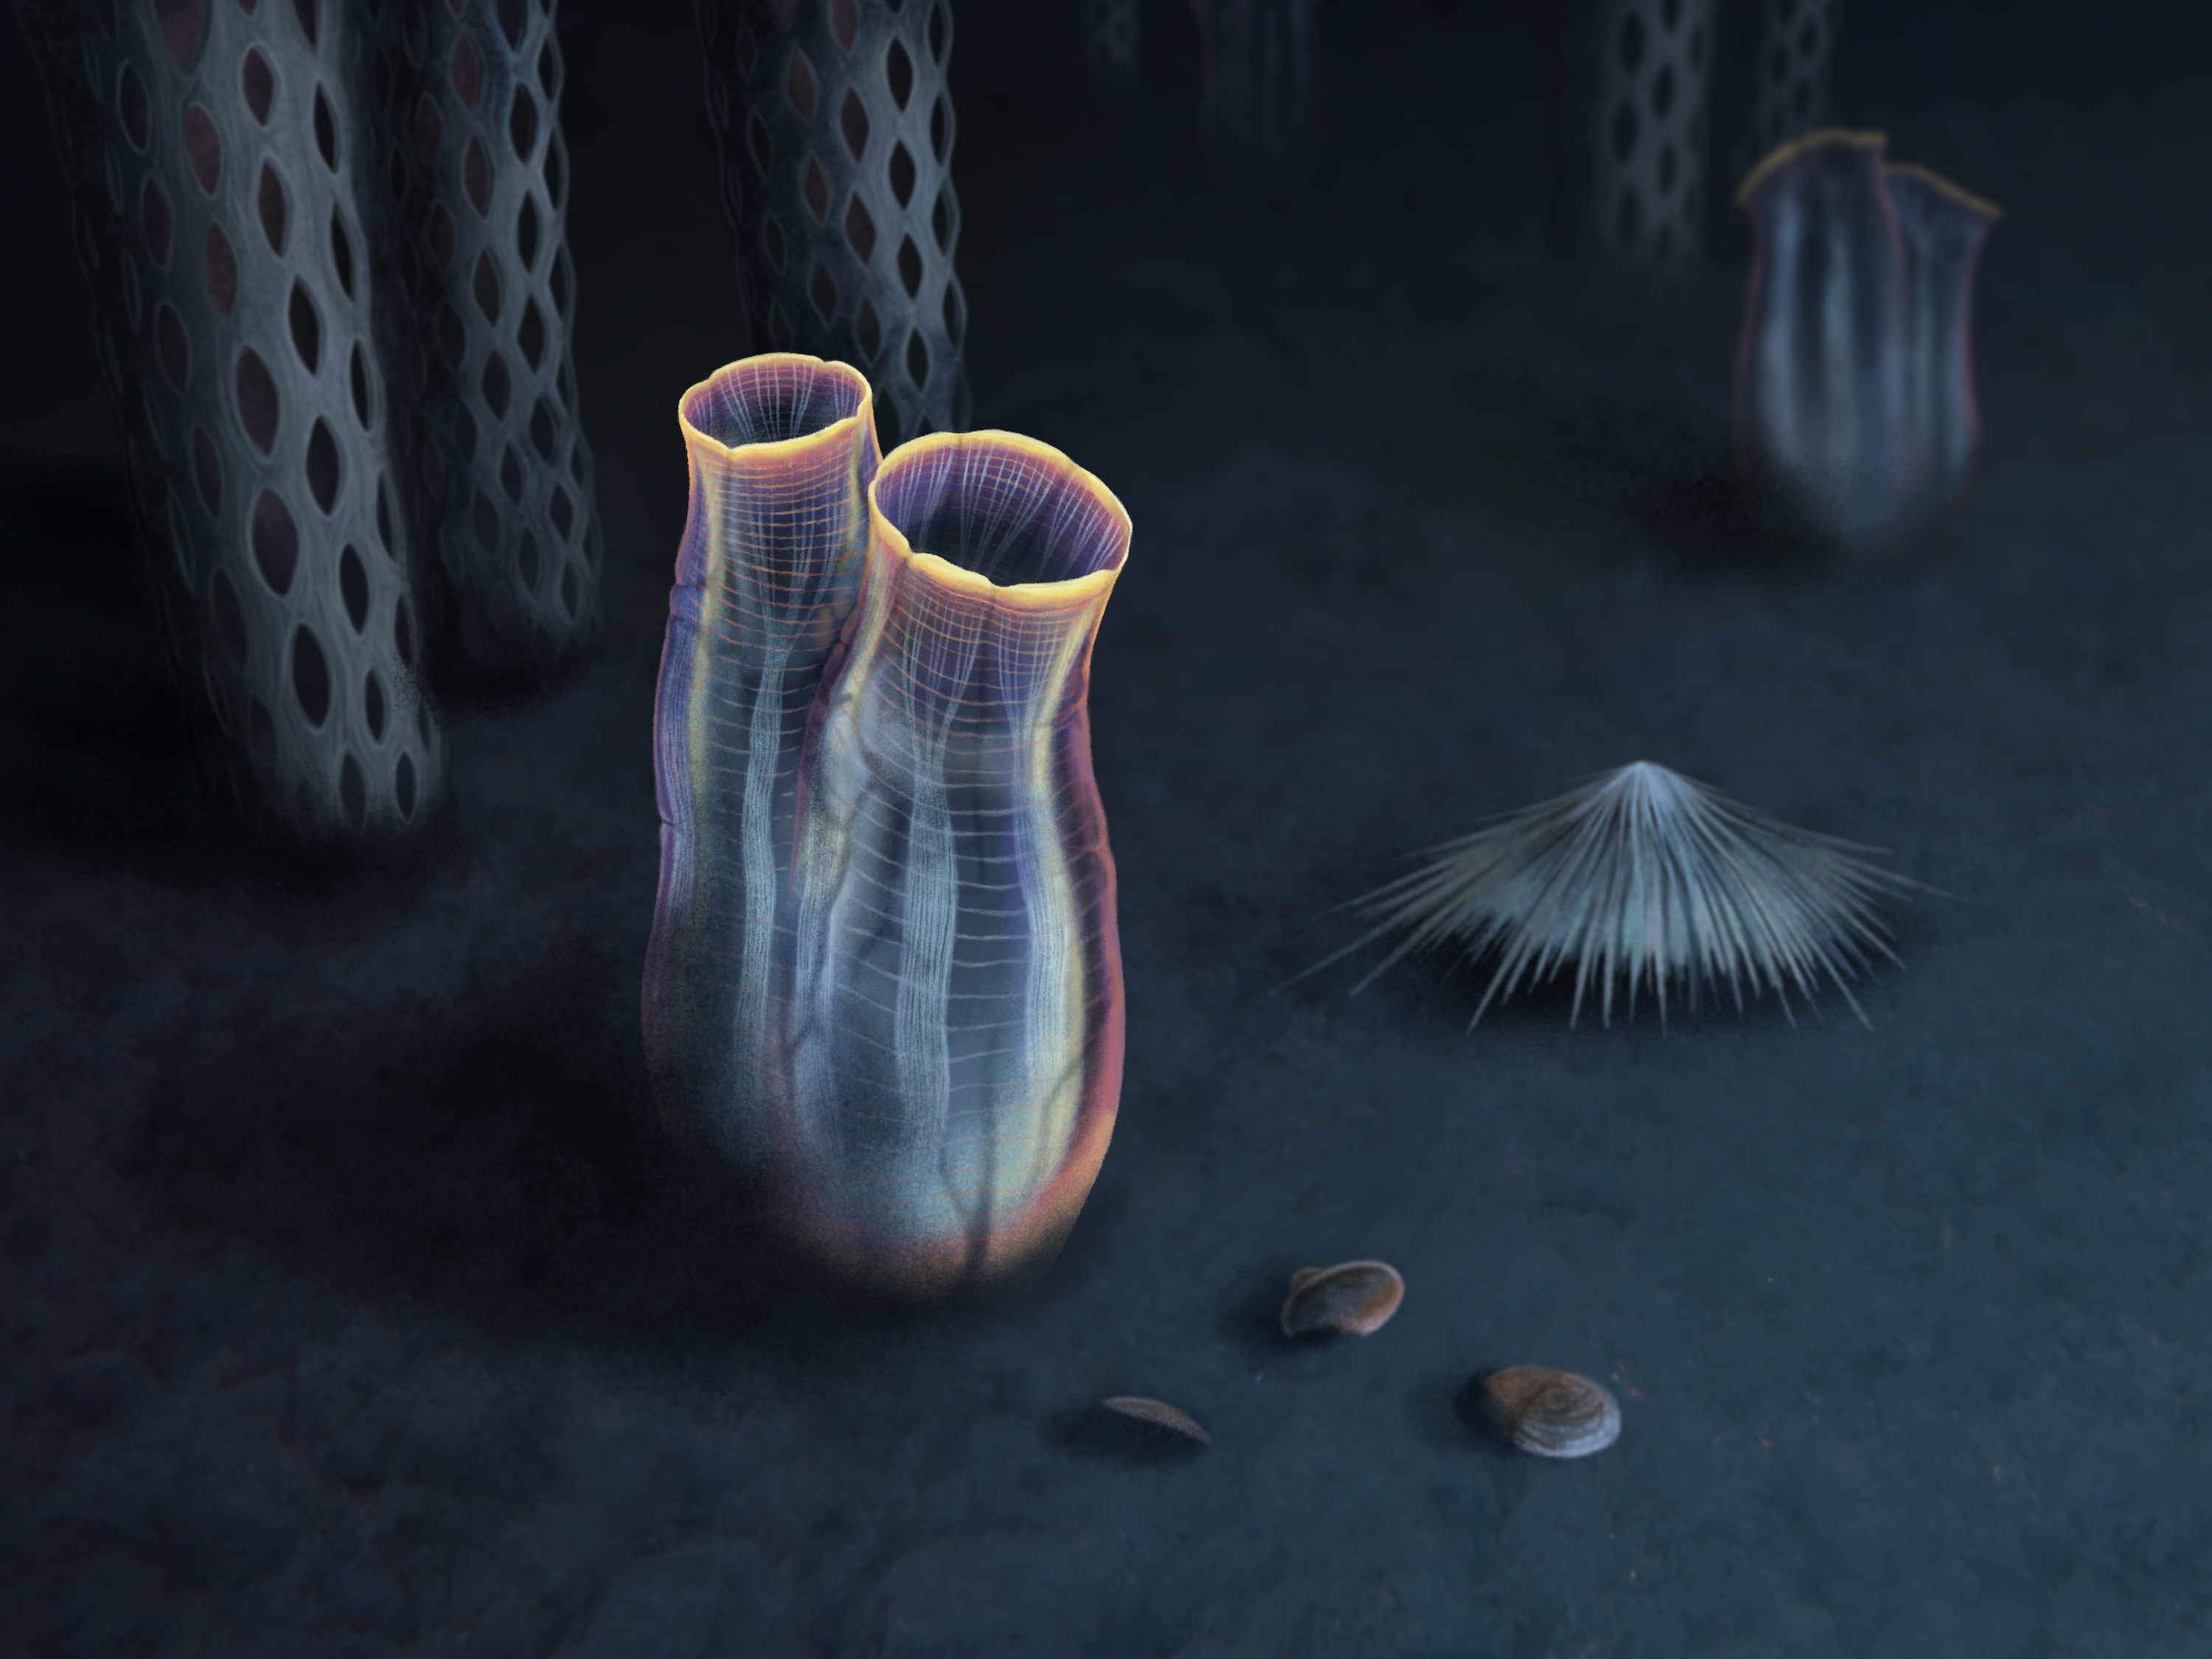 Artistic reconstruction of Megasiphon thylakos, a benthic organism that lived directly on the seafloor. The tunicate looks like two ghostly cylinders sitting on the seafloor